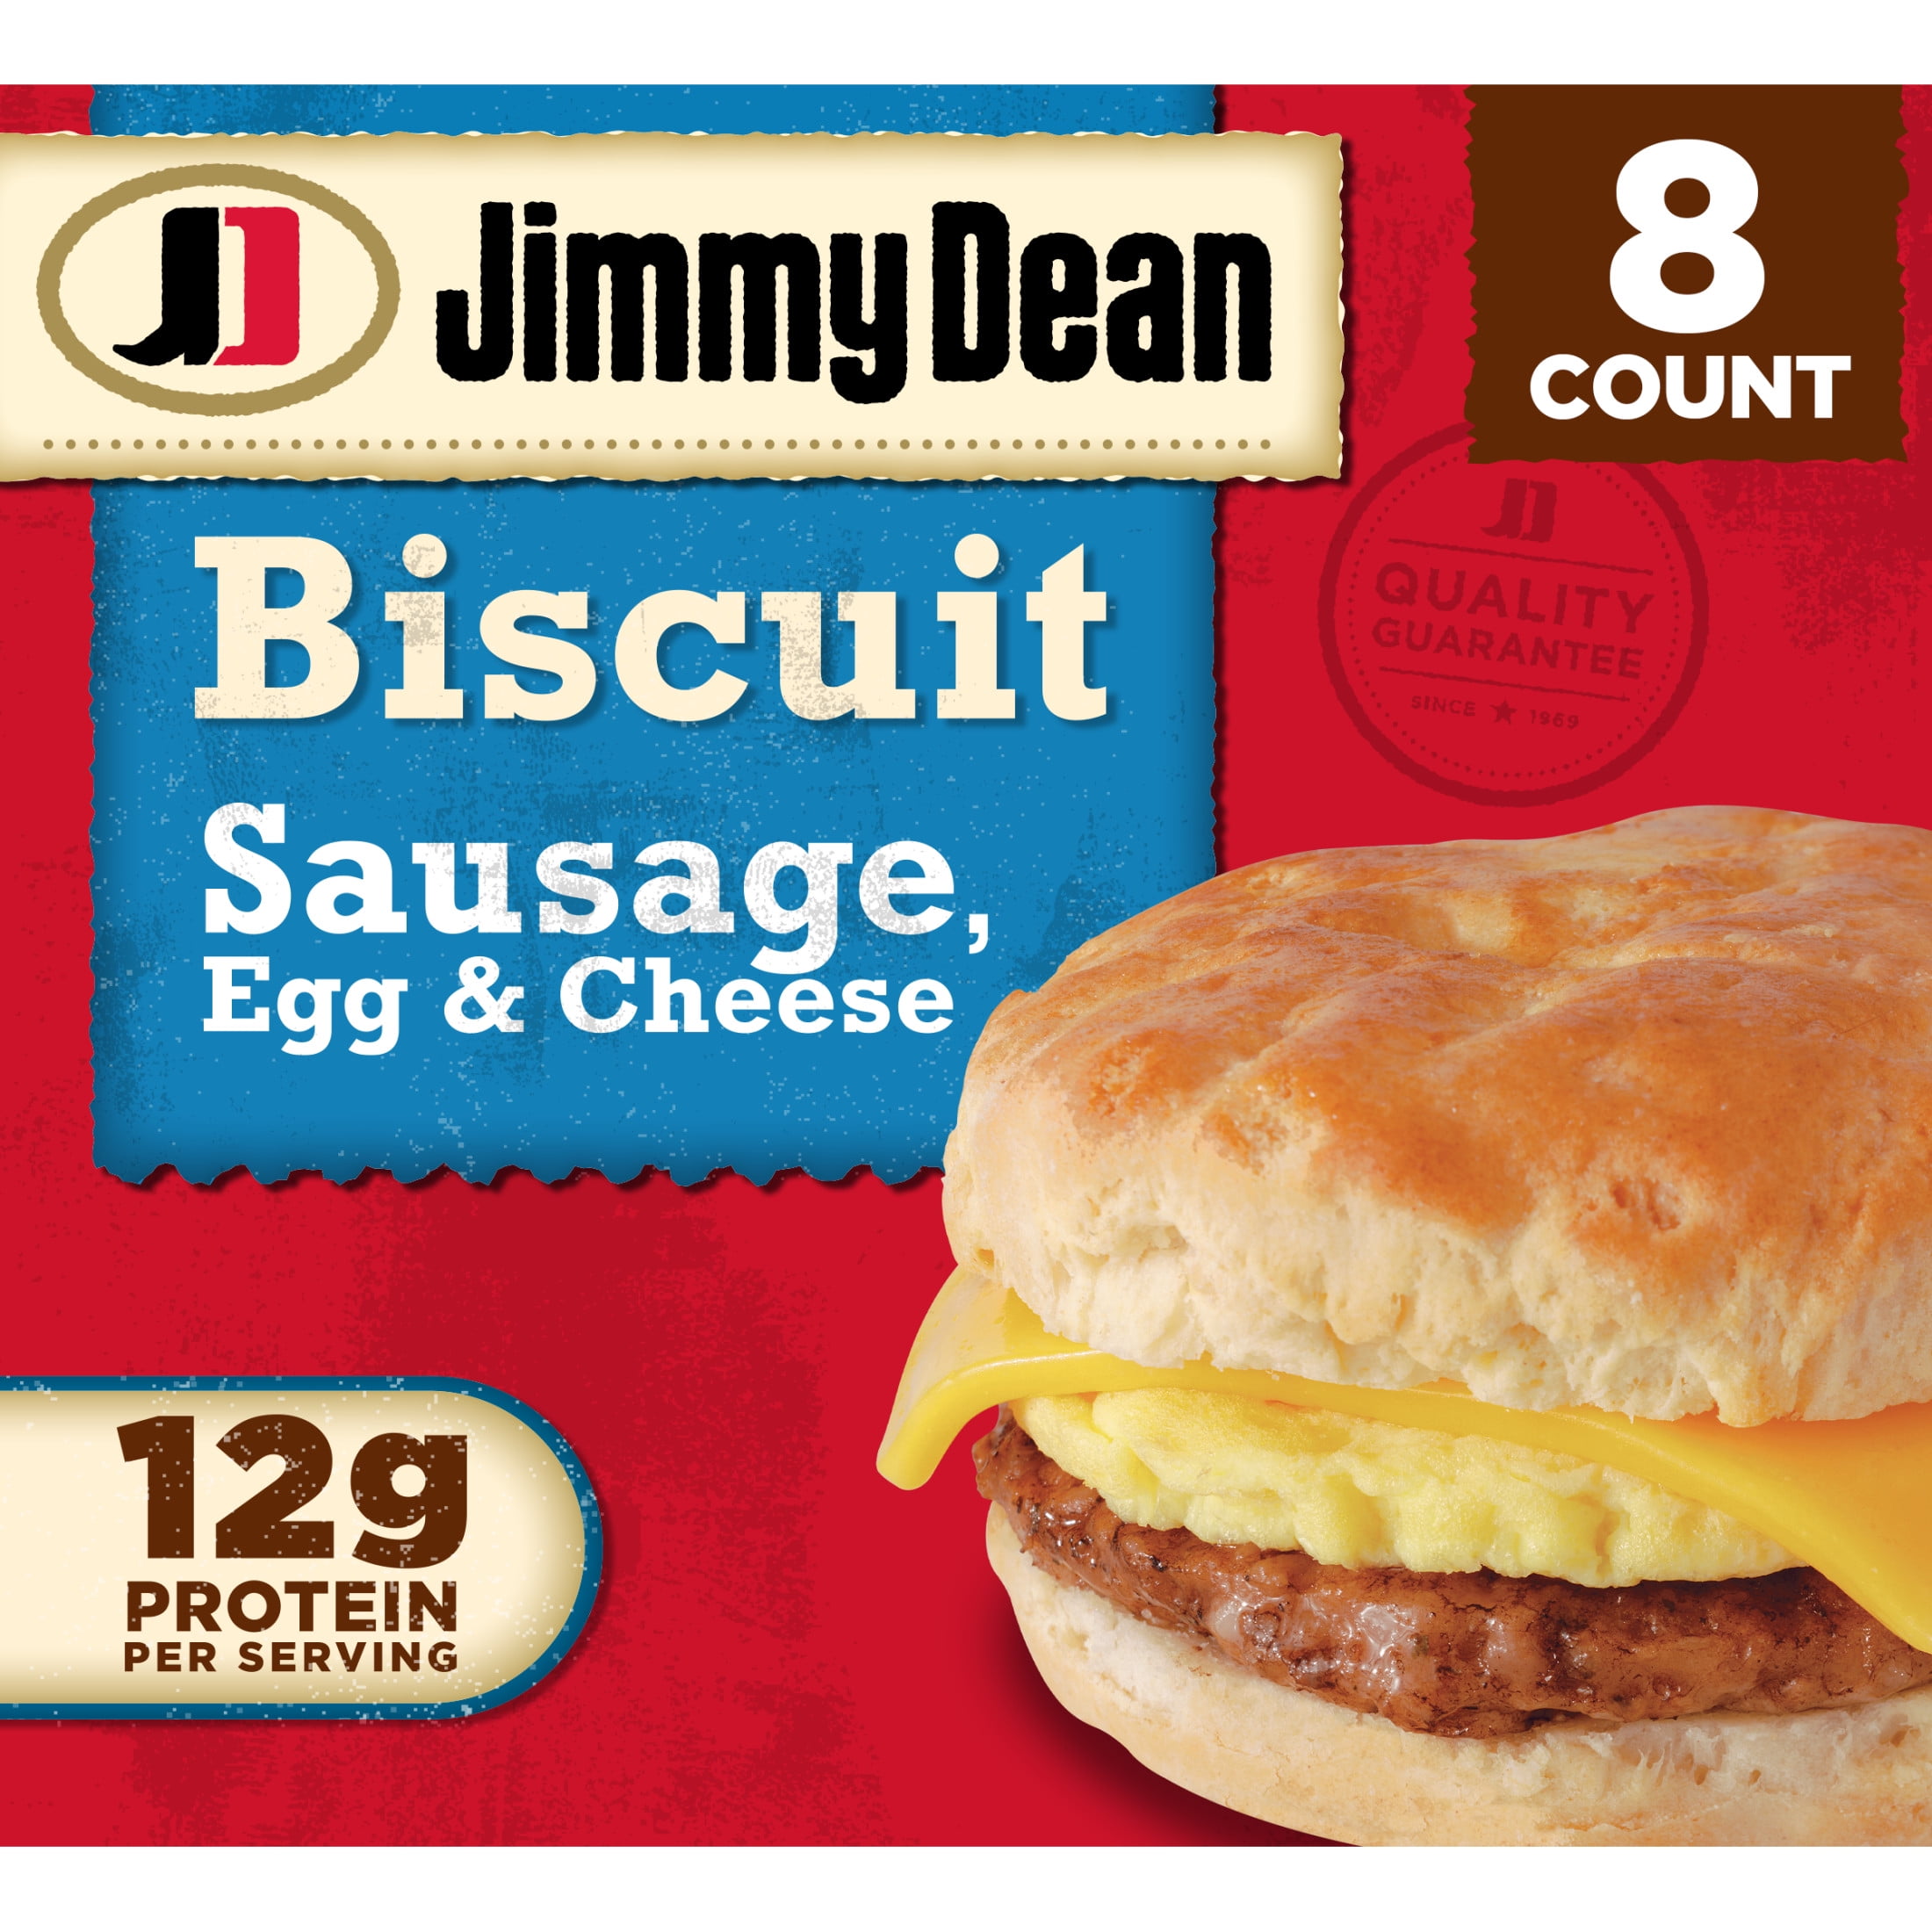 Jimmy Dean Sausage Egg & Cheese Biscuit Sandwich, 36 oz, 8 Count ...